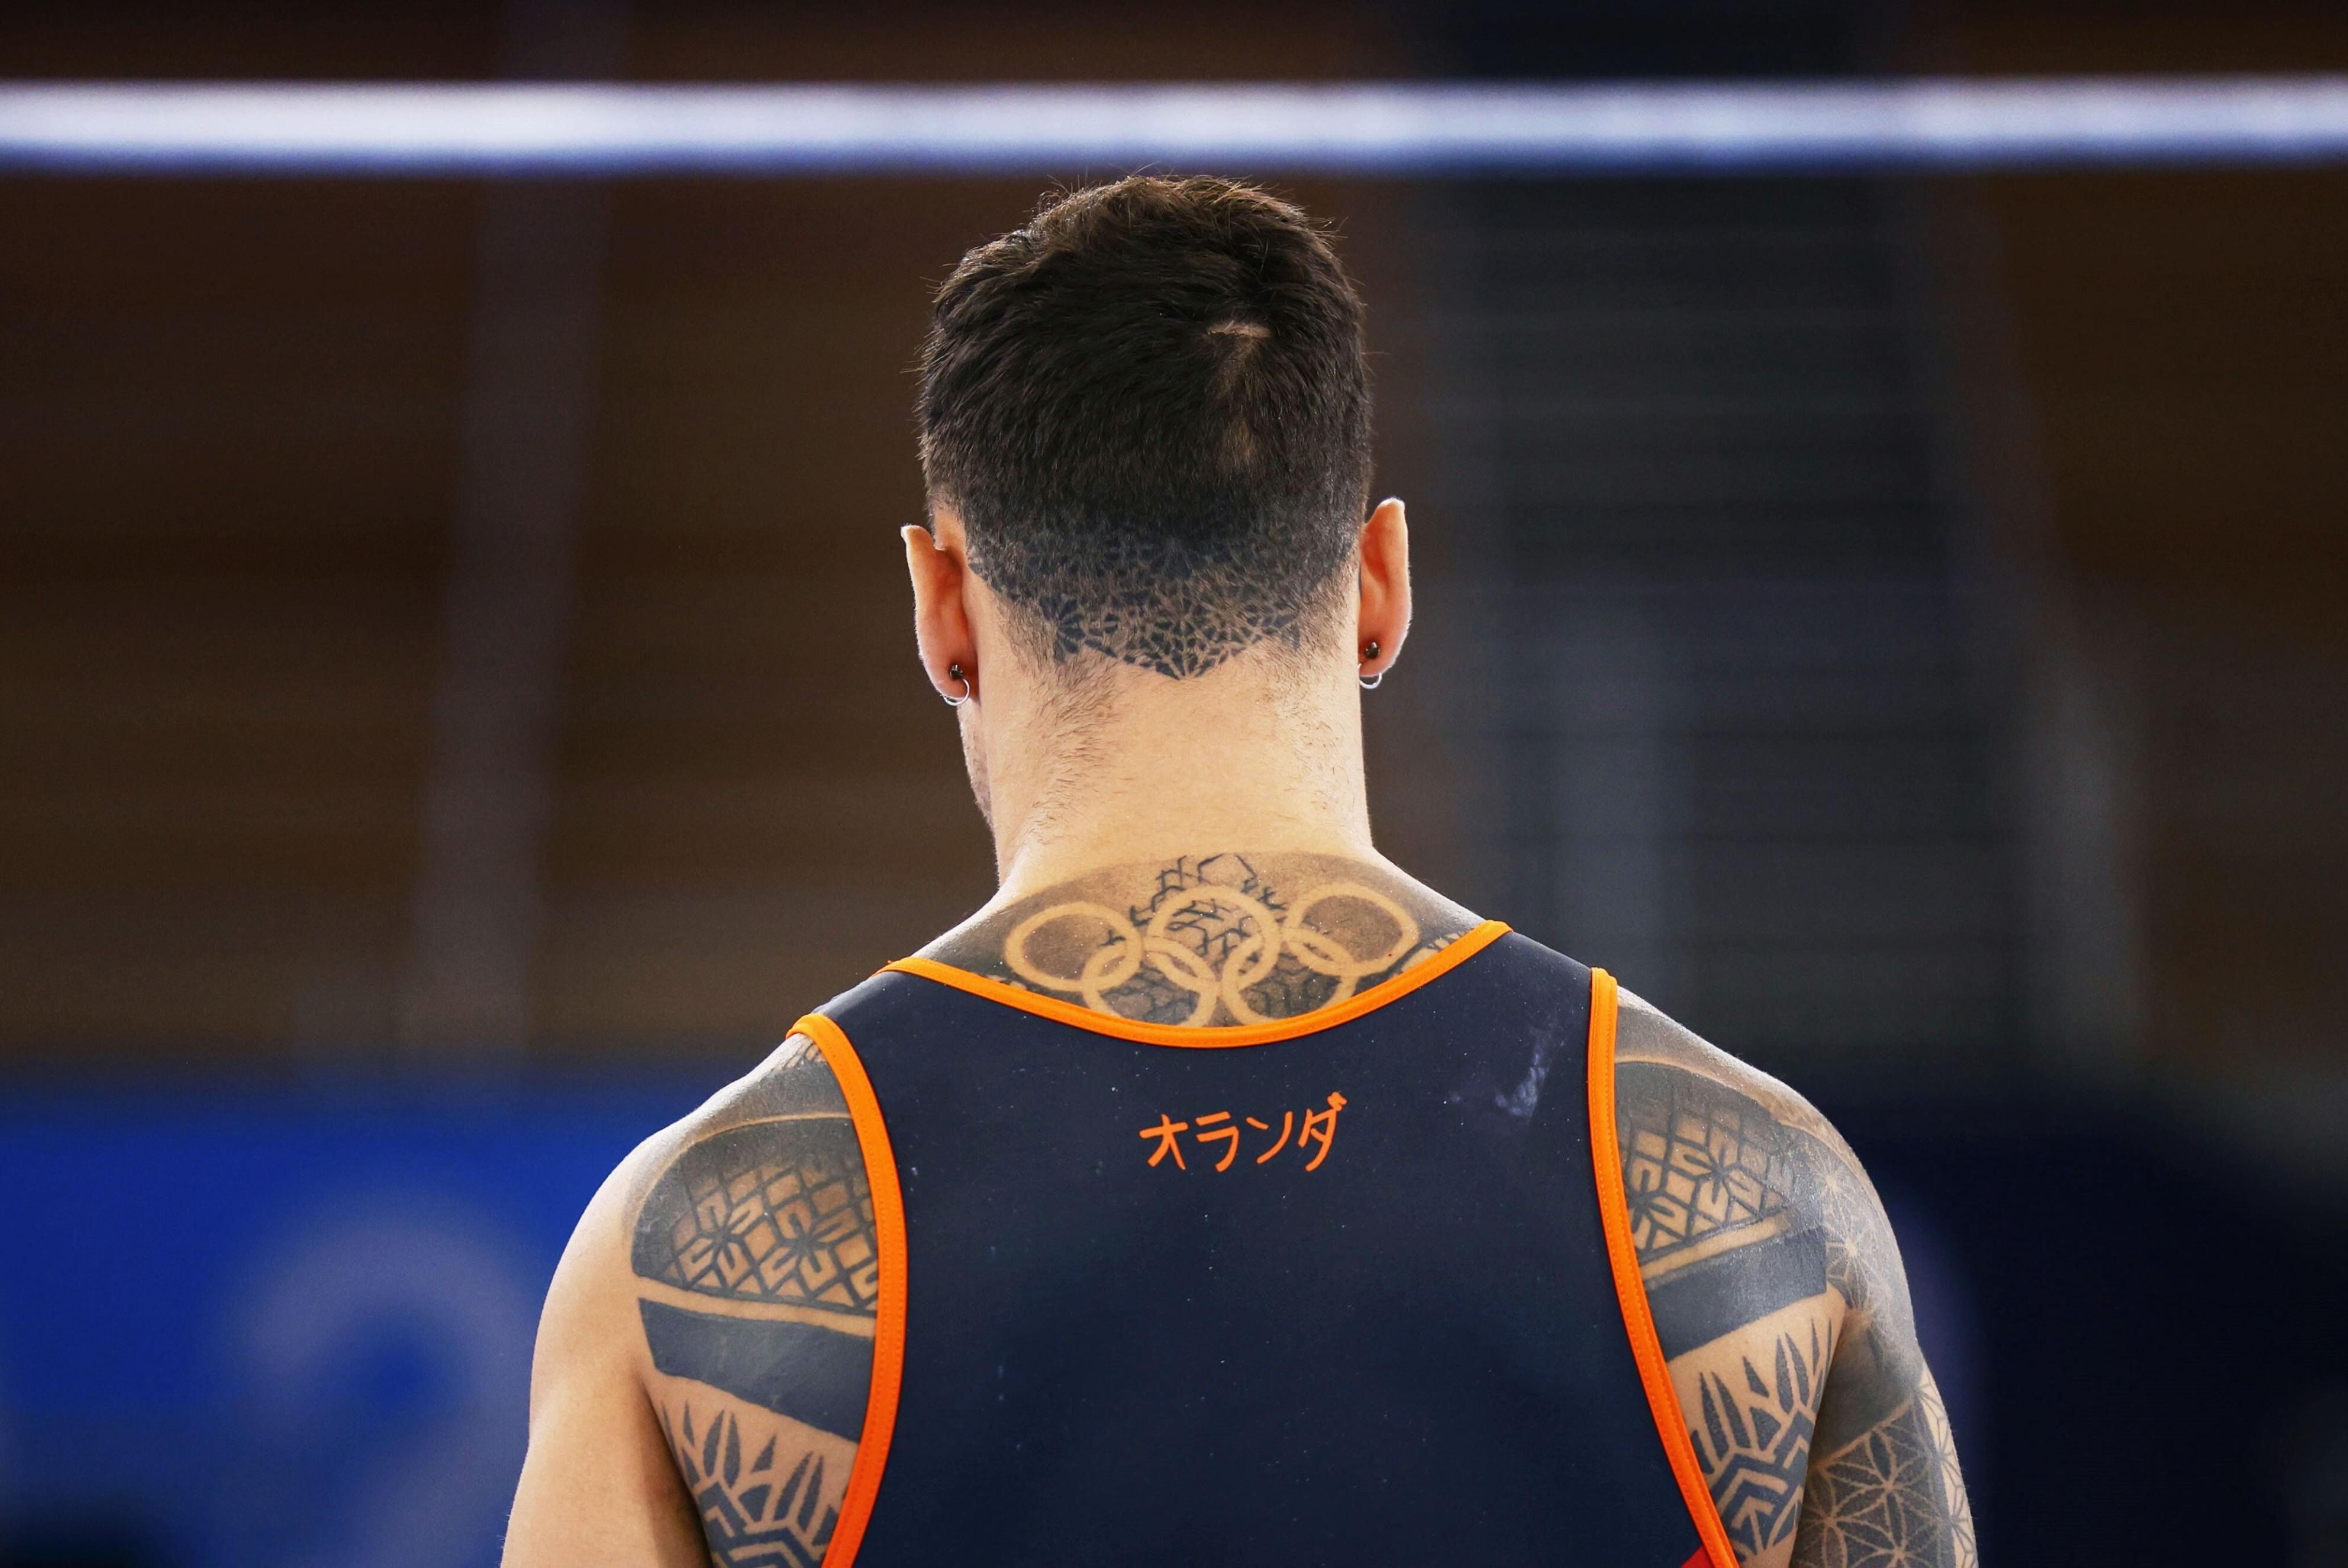 Bart Deurloo of the Netherlands sporting his Olympic rings tattoo. Photo: Kyodo